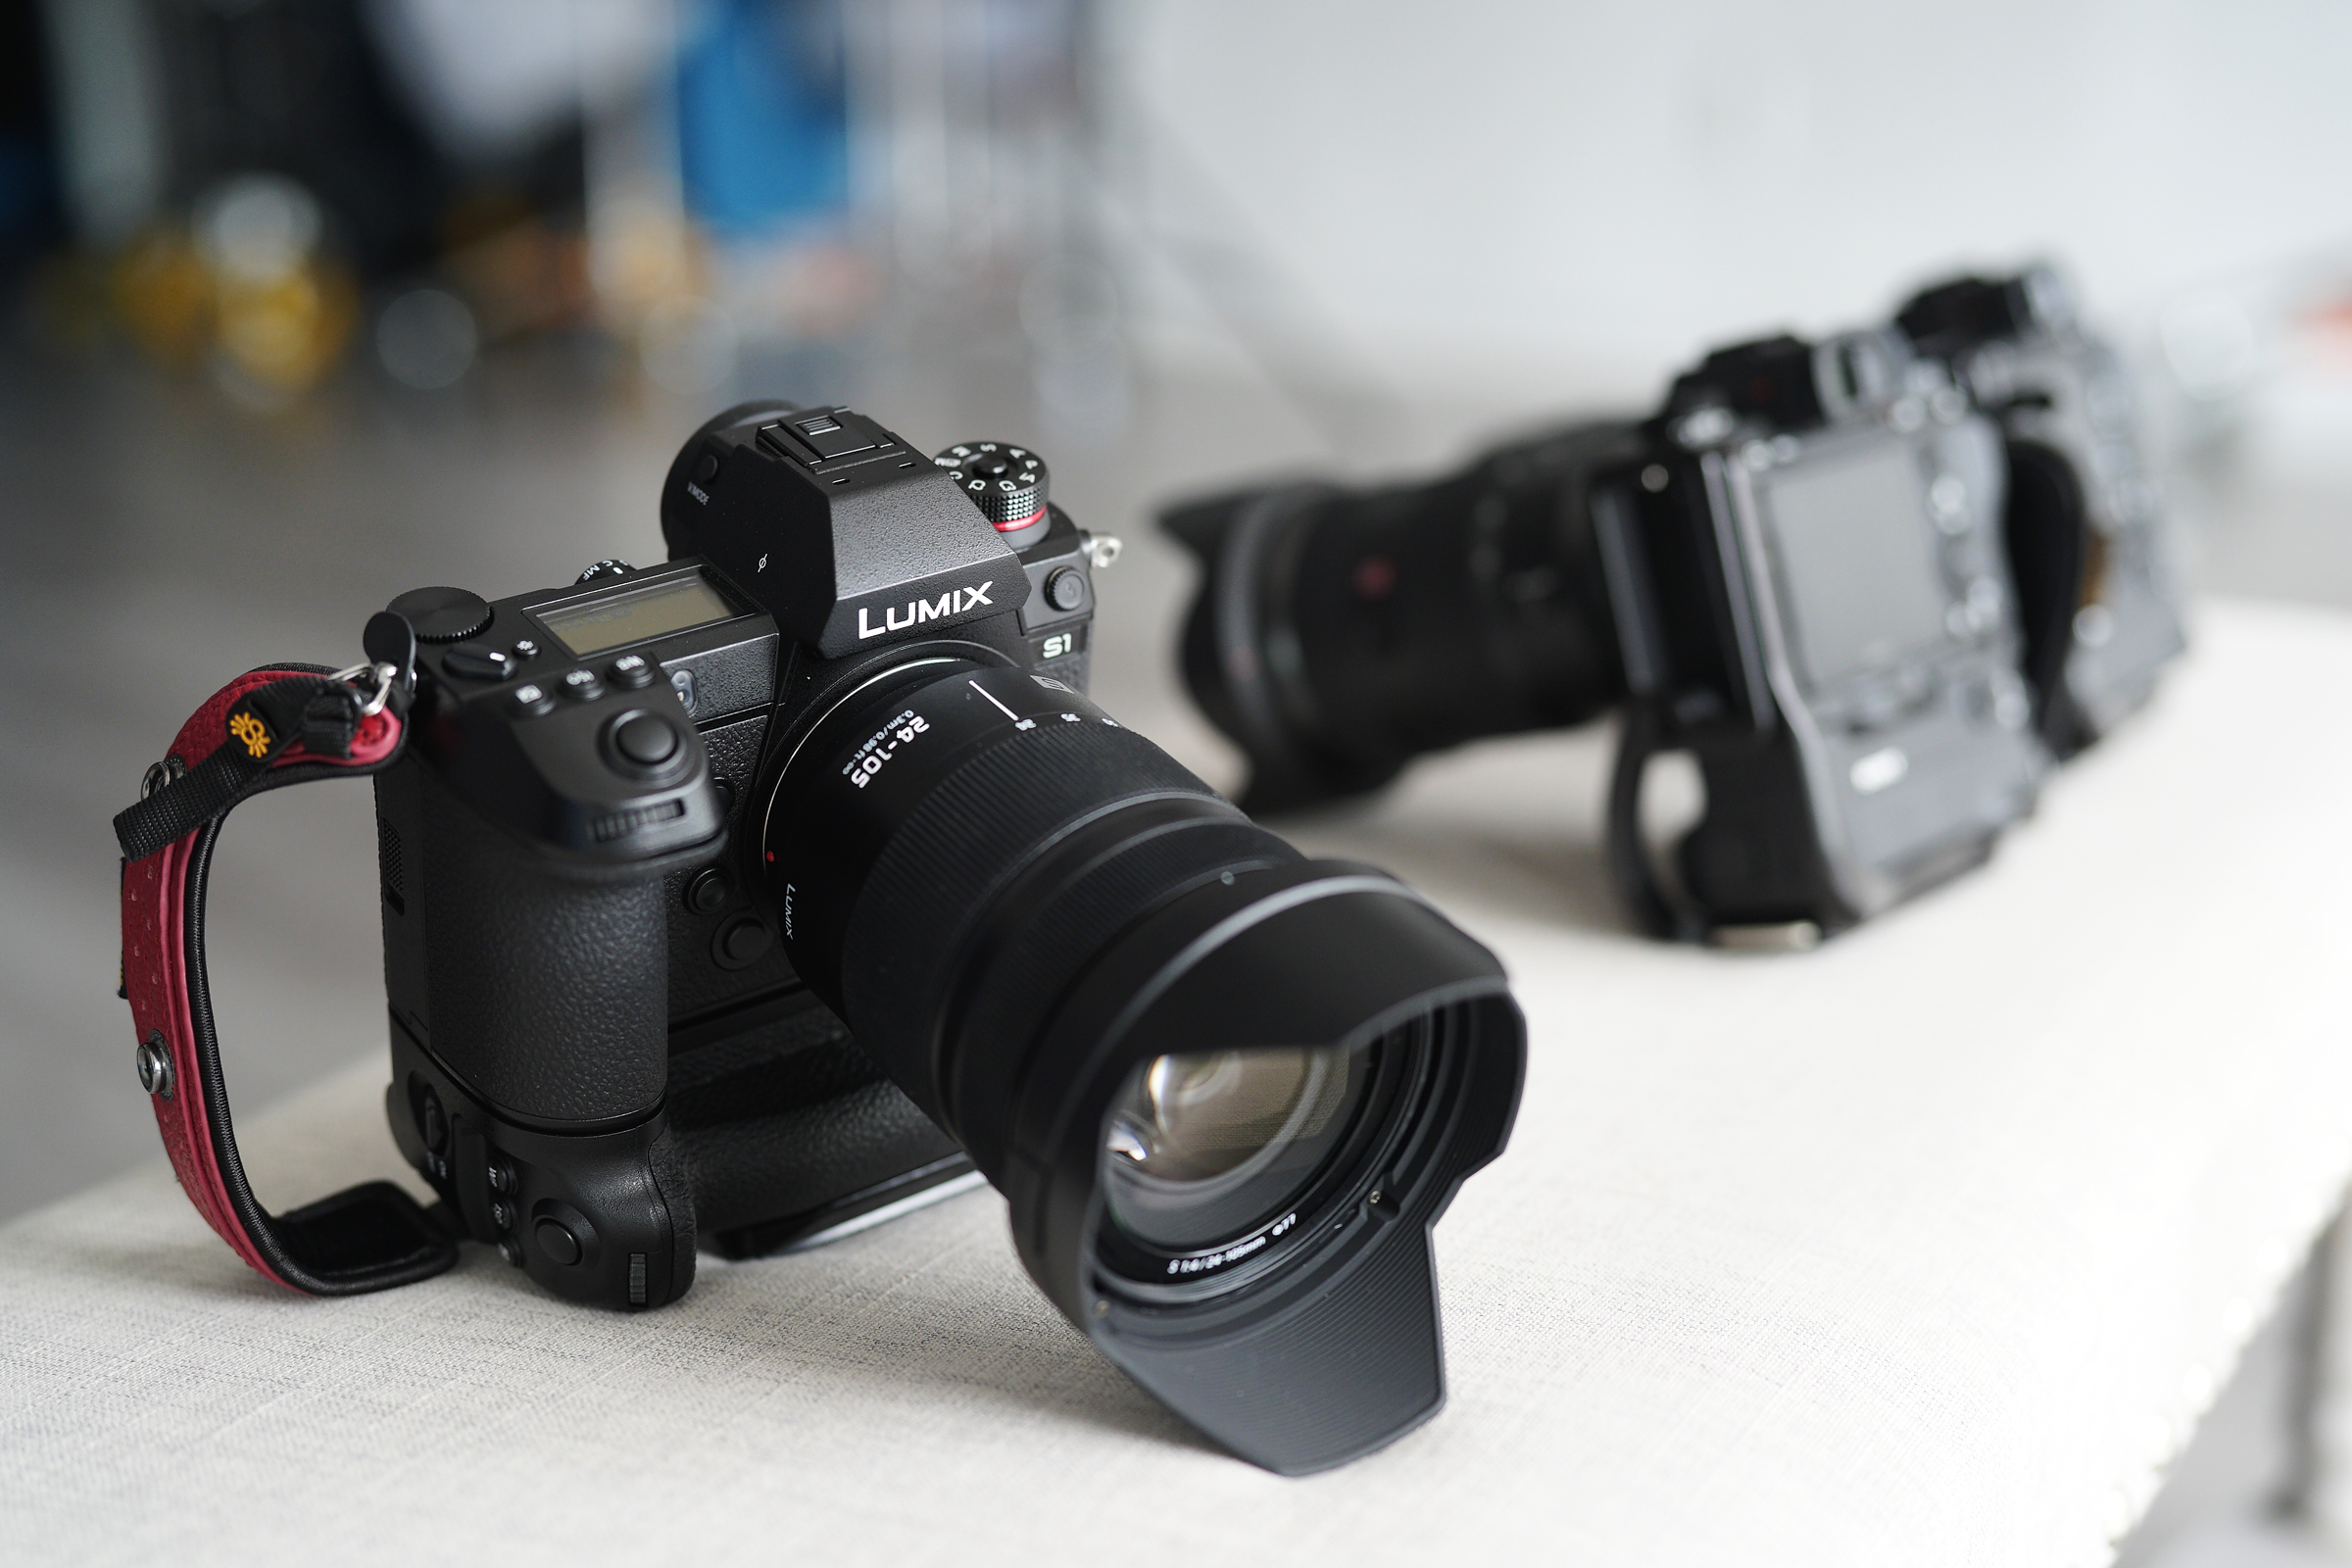 Panasonic Lumix S1 Review from a Sony Photographer